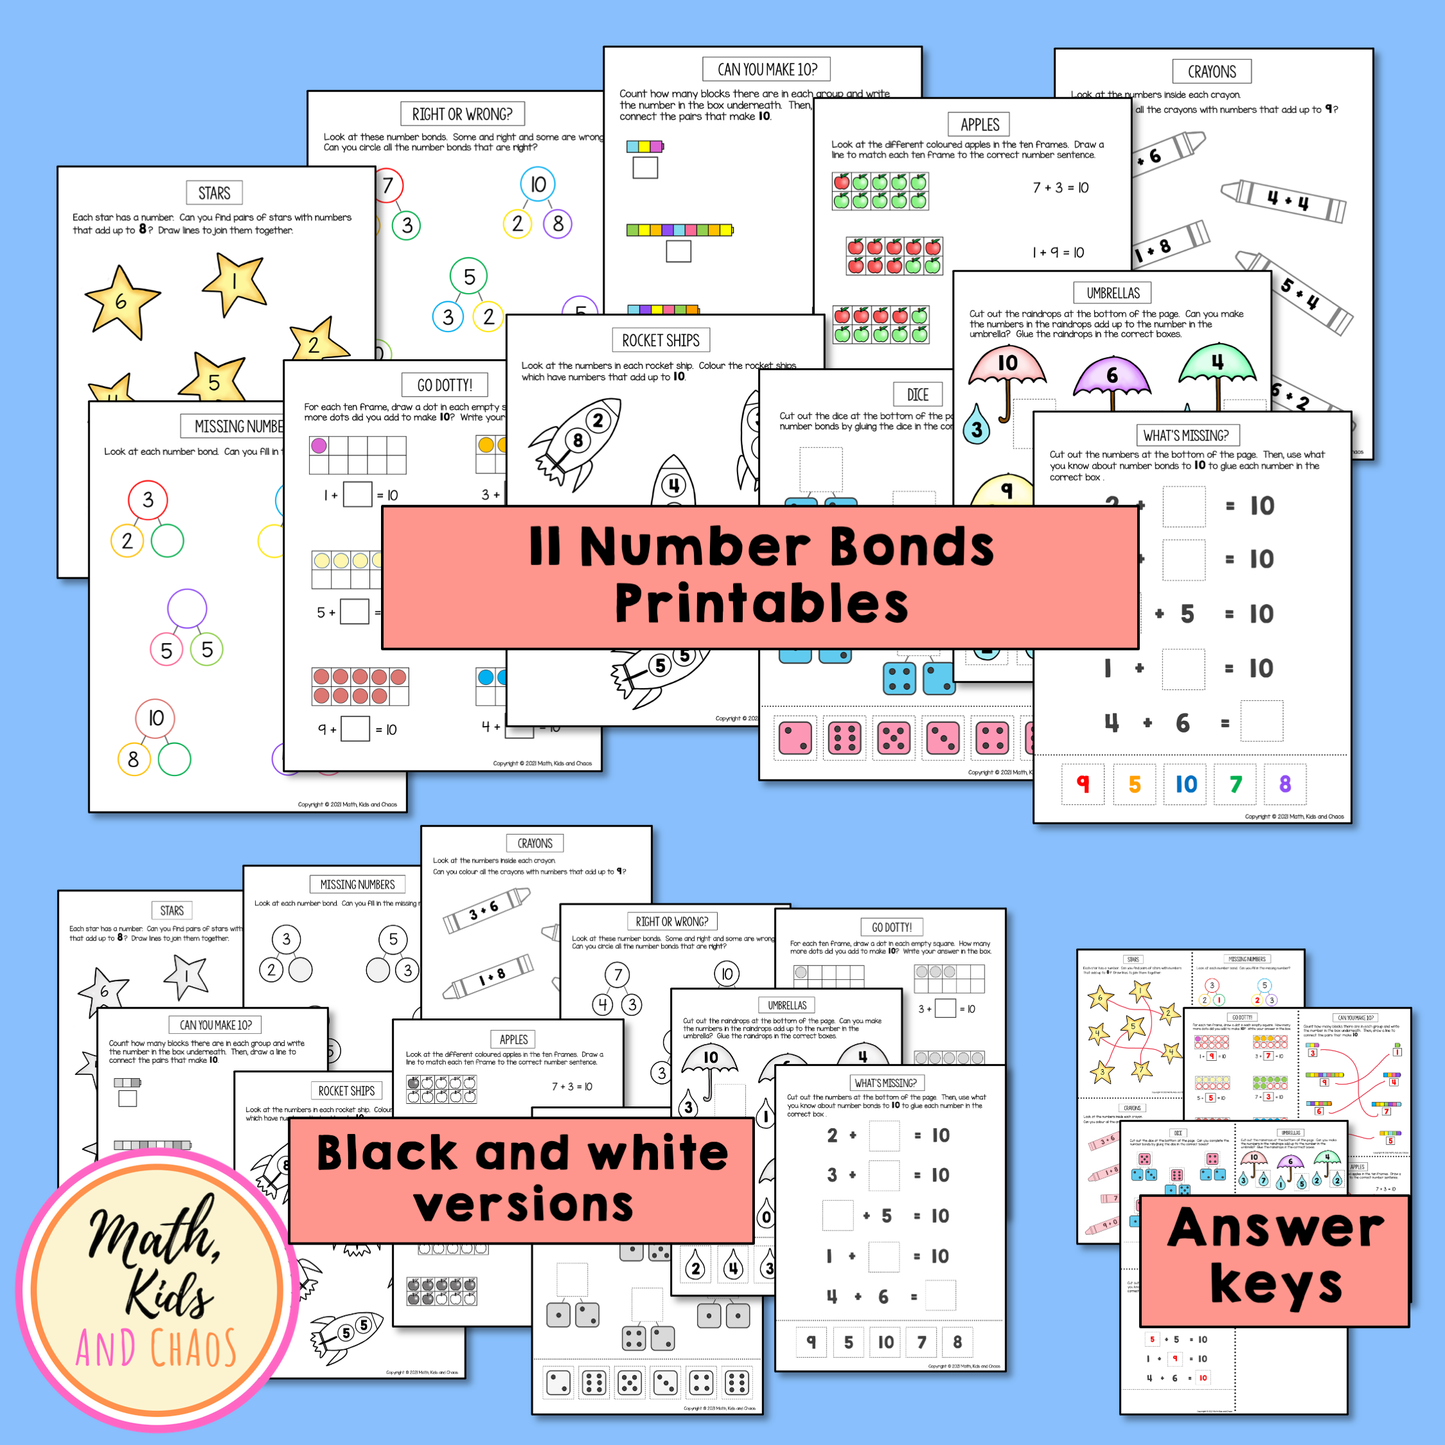 Number Bonds Printables (numbers to 10) CAN/AUS/UK Spelling